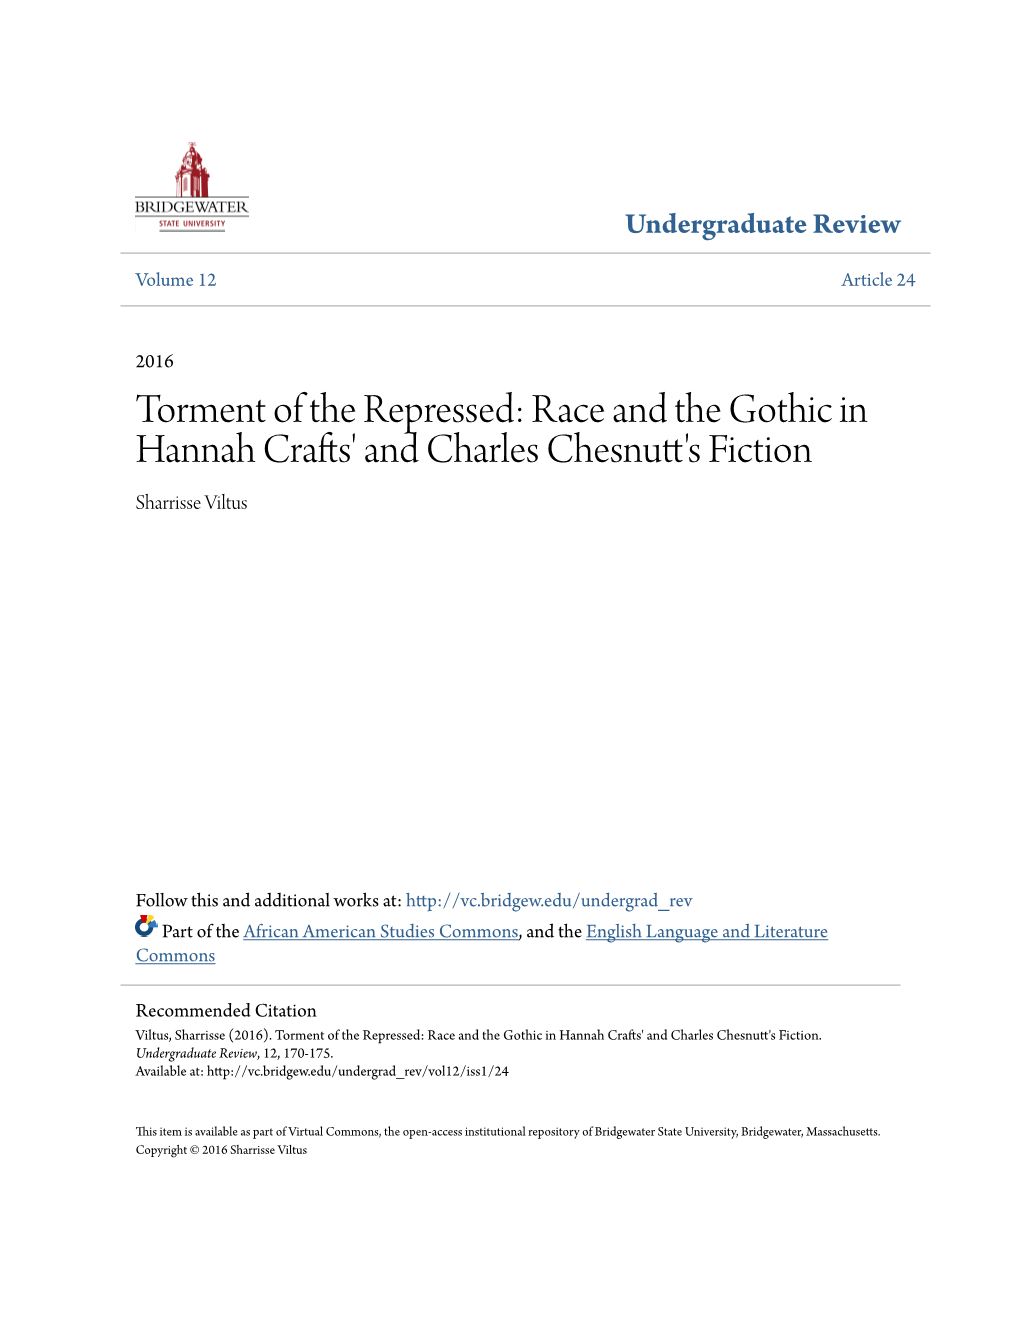 Race and the Gothic in Hannah Crafts' and Charles Chesnutt's Fiction Sharrisse Viltus